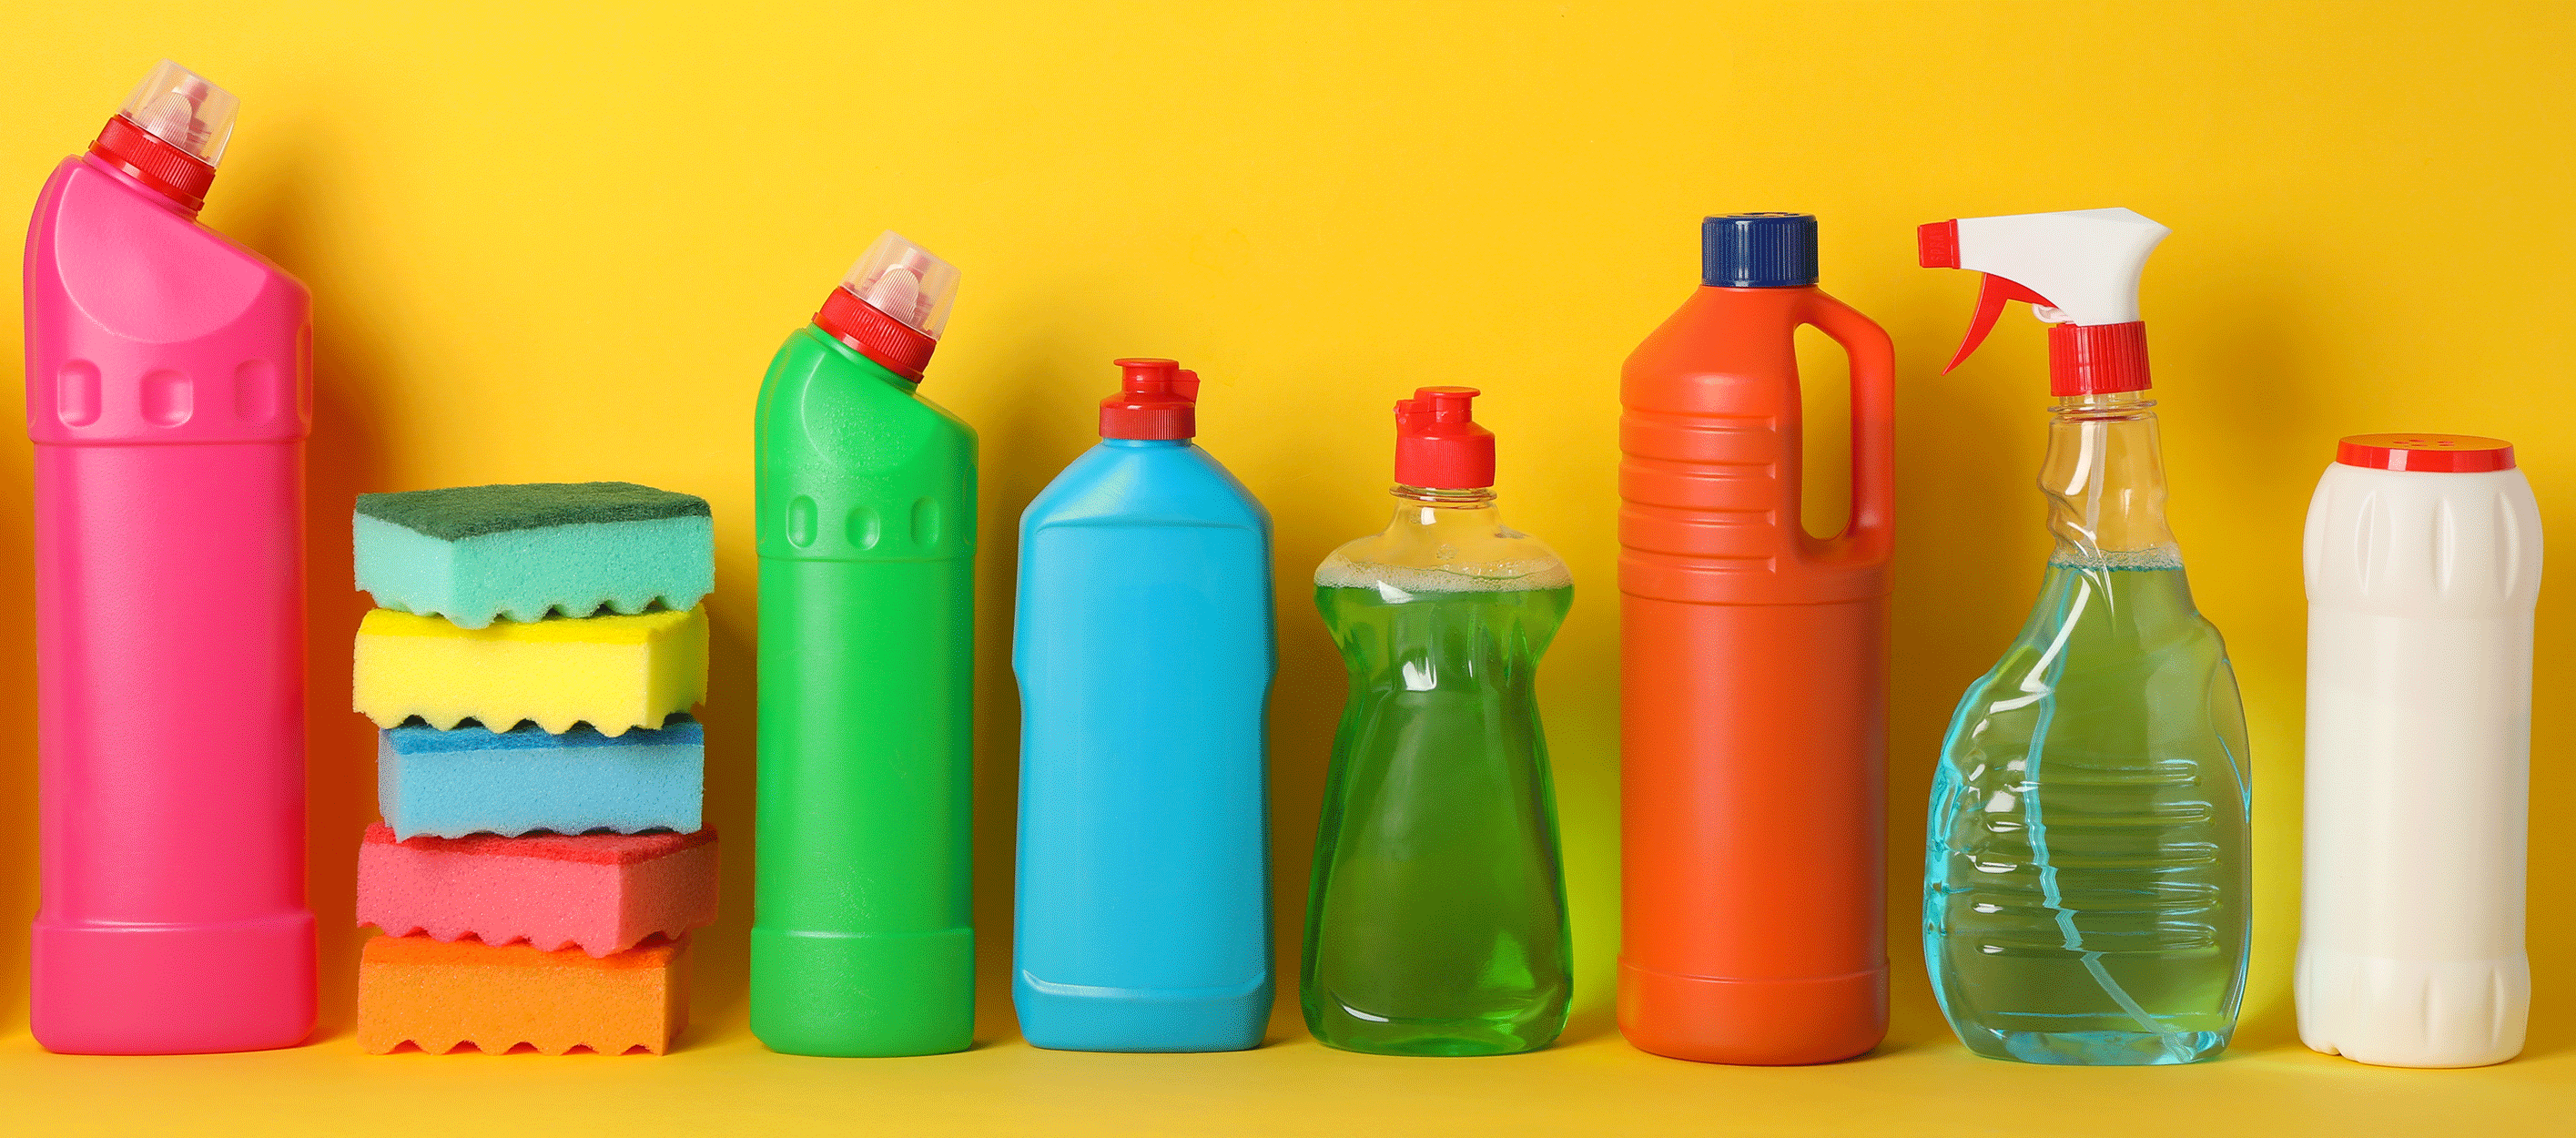 various bottles representing cleaning products